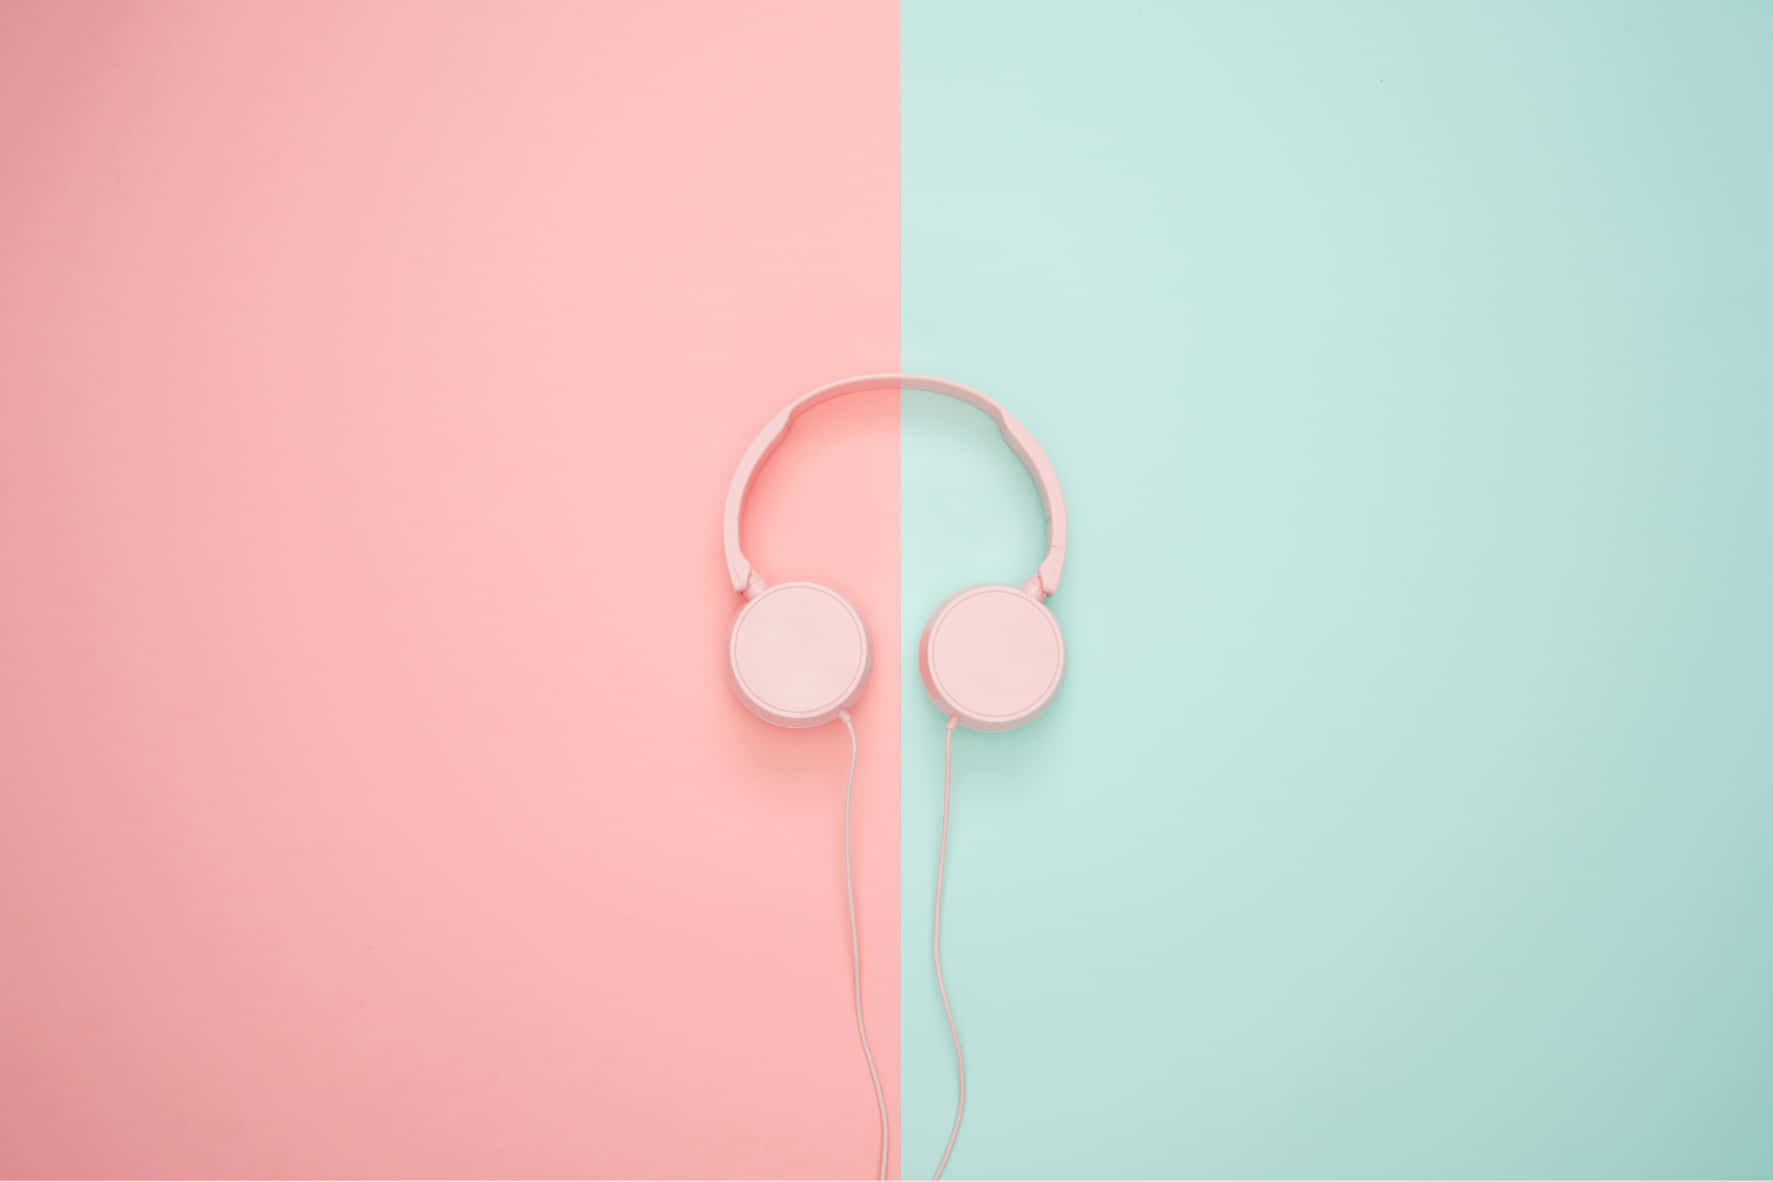 Pink Headphones On A Pink And Blue Background Background